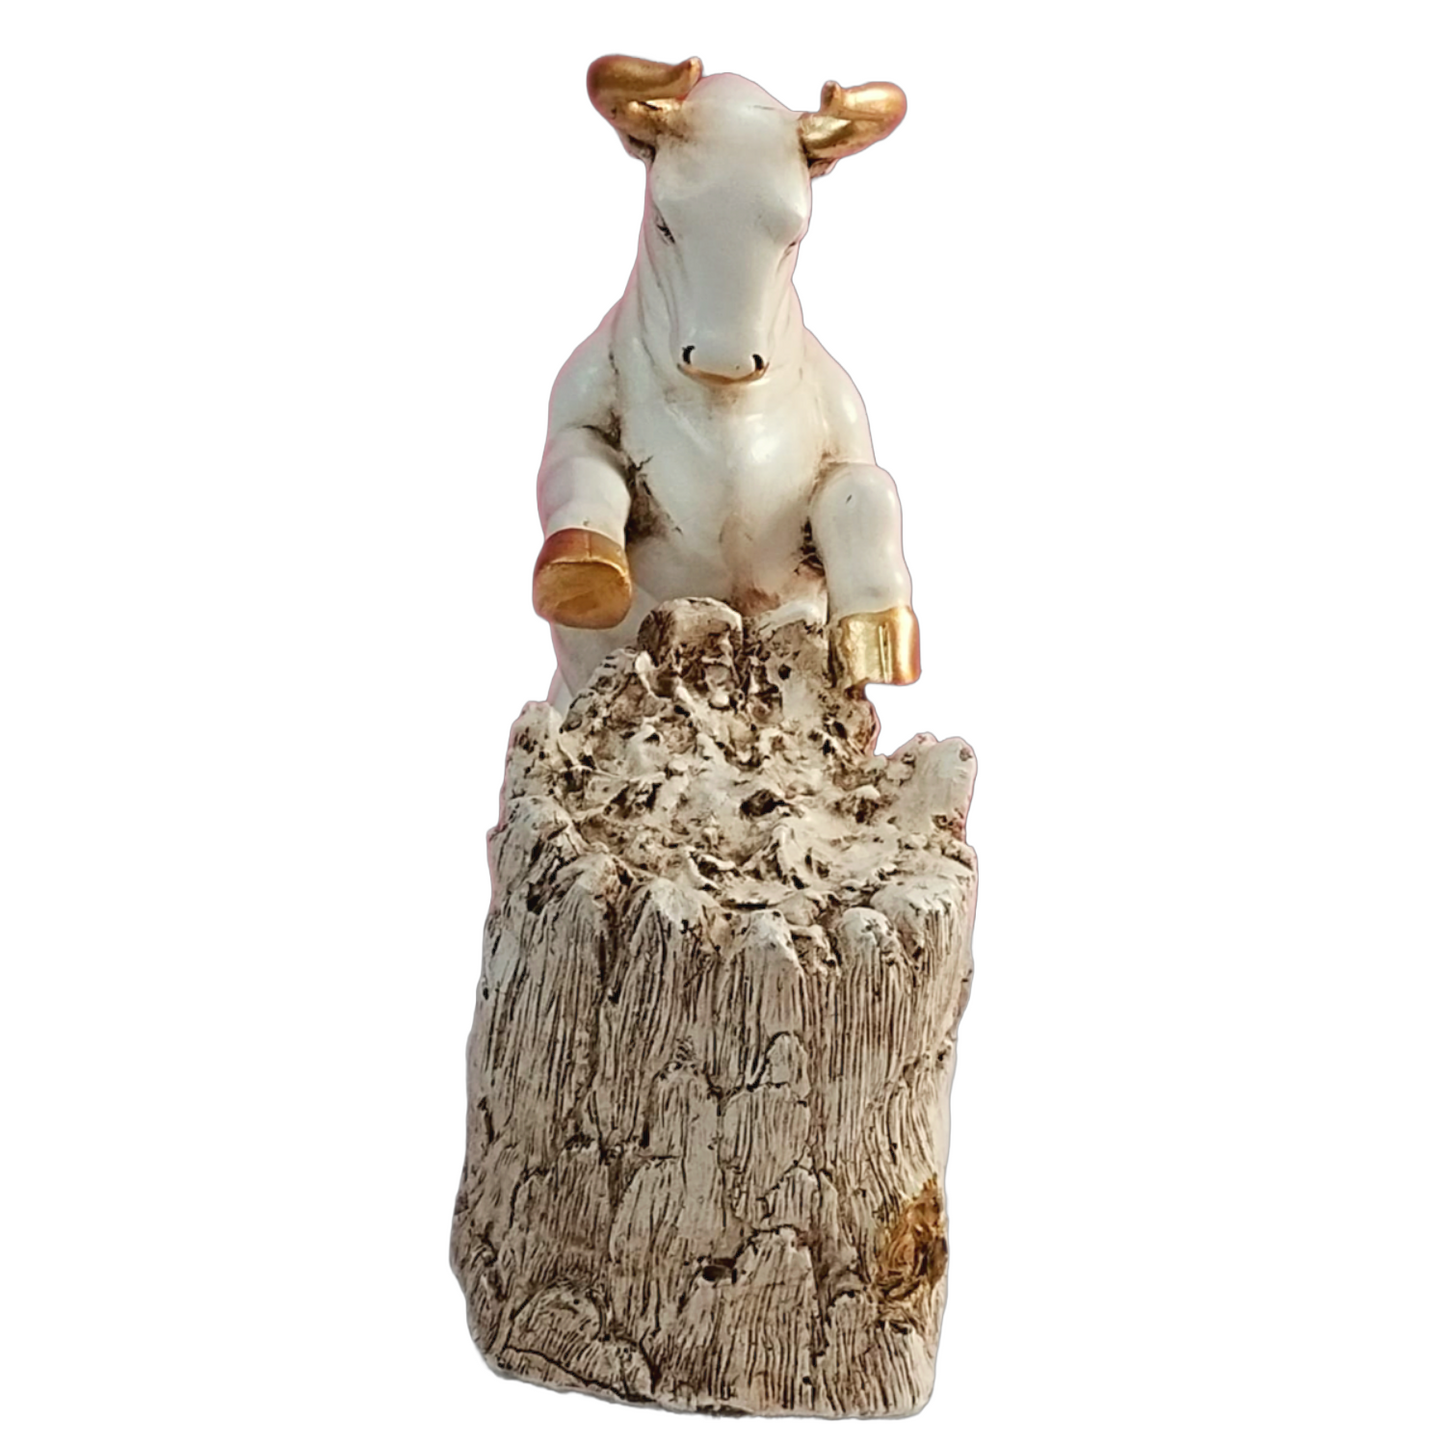 Statue ALiLA Bull with Log Statue Showpiece Idol for Gifting & Home Office Desk Table Decoration or Gifting, 10.5 inch Height Statue